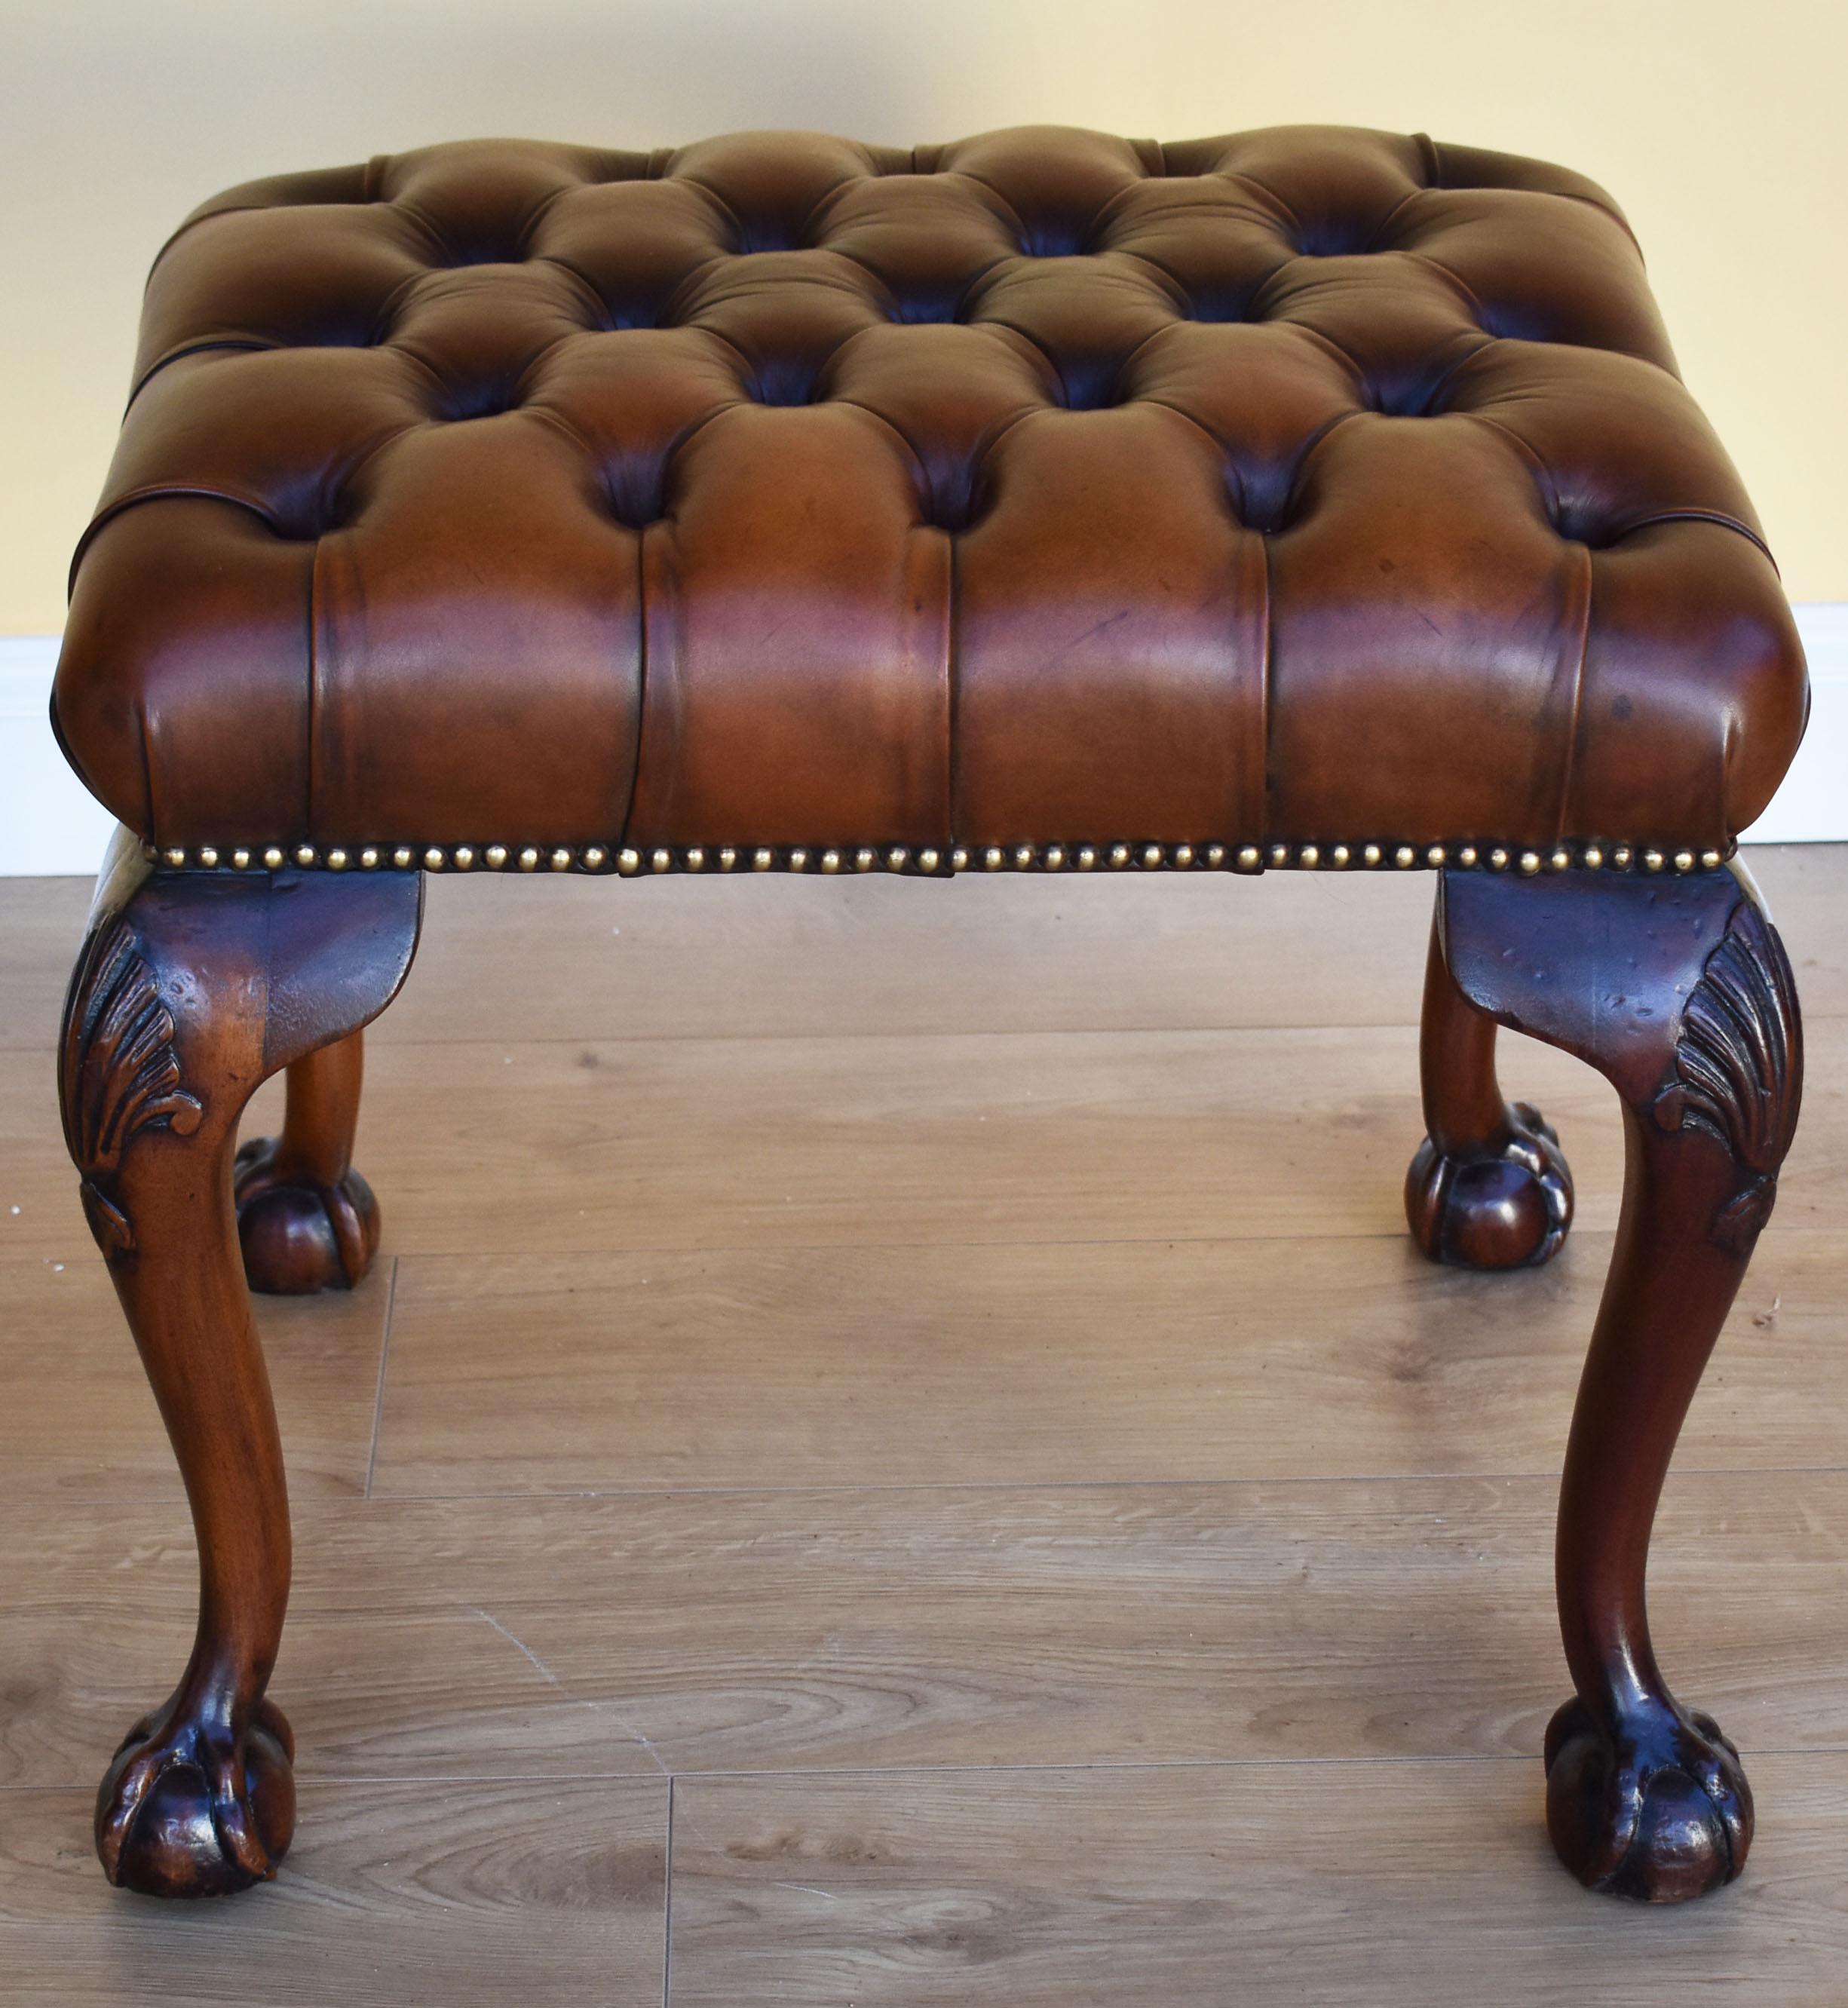 For sale is a fine quality Queen Anne style deep buttoned leather foot stool. The stool has been upholstered in leather hide and has been dyed by hand. It stands on elegant cabriole legs terminating on claw and ball feet. All of the upholstery is in